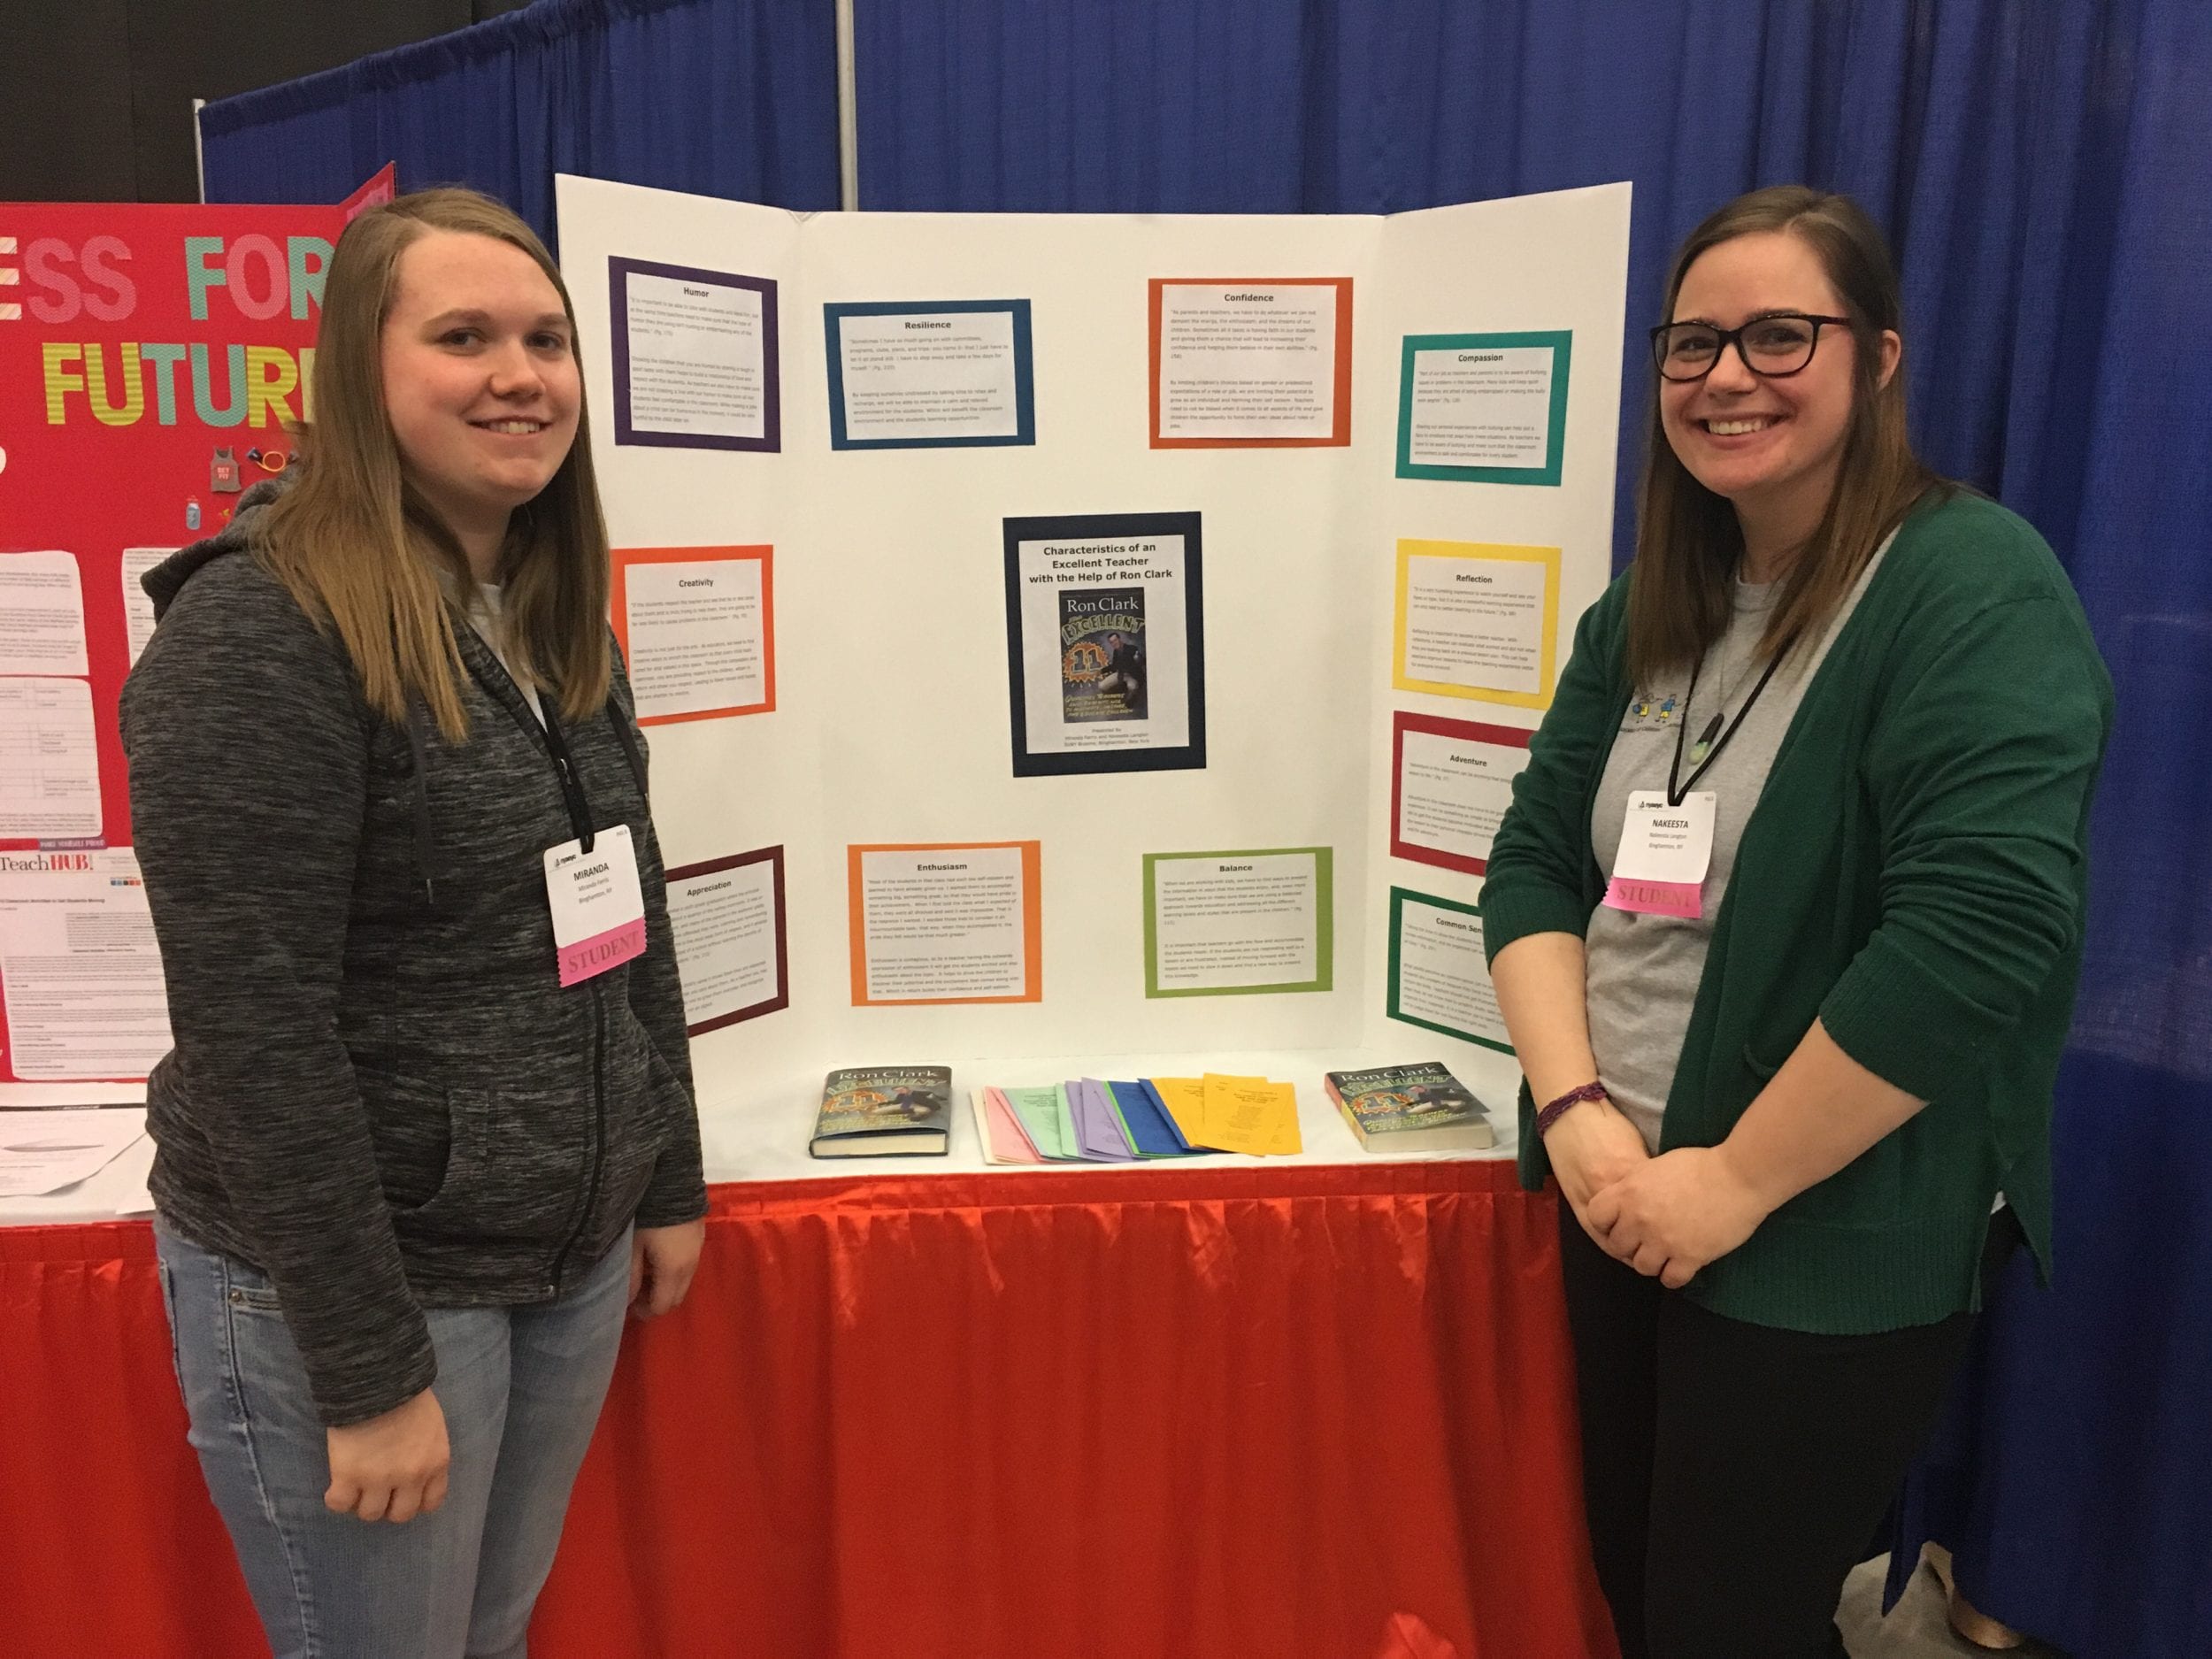 Miranda Ferris (left) and Nakeesta Langton (right) at the NAEYC conference in Verona.